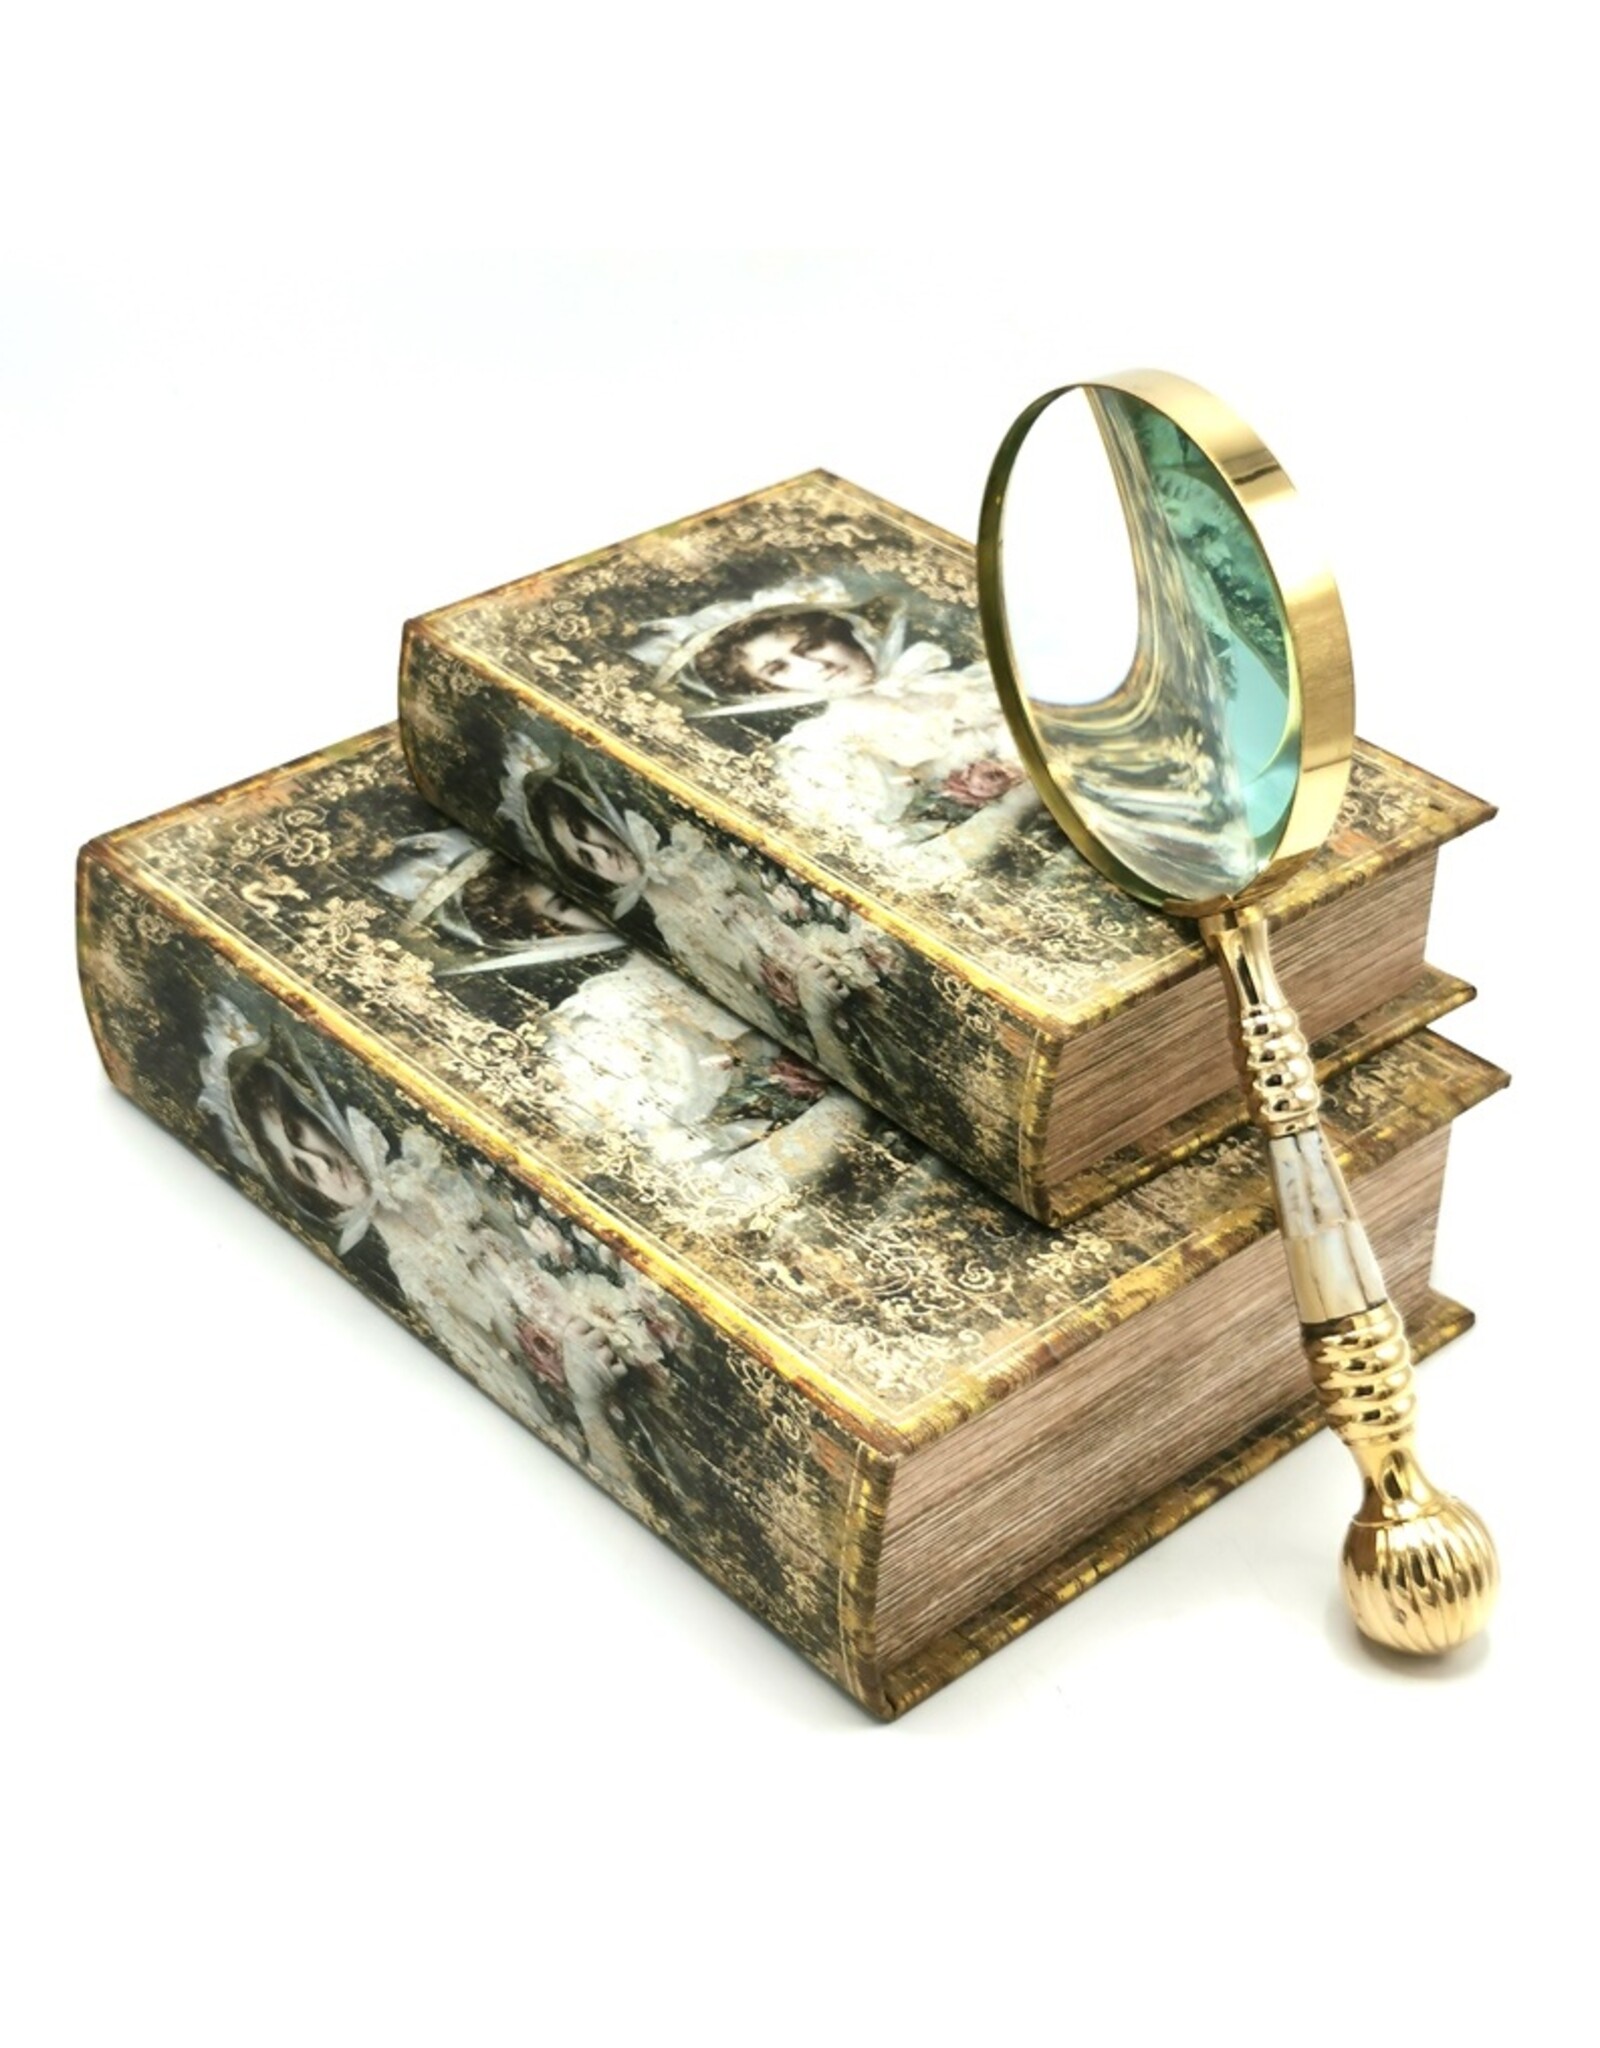 Trukado Miscellaneous - Vintage Magnifying Glass brass with pearl accents